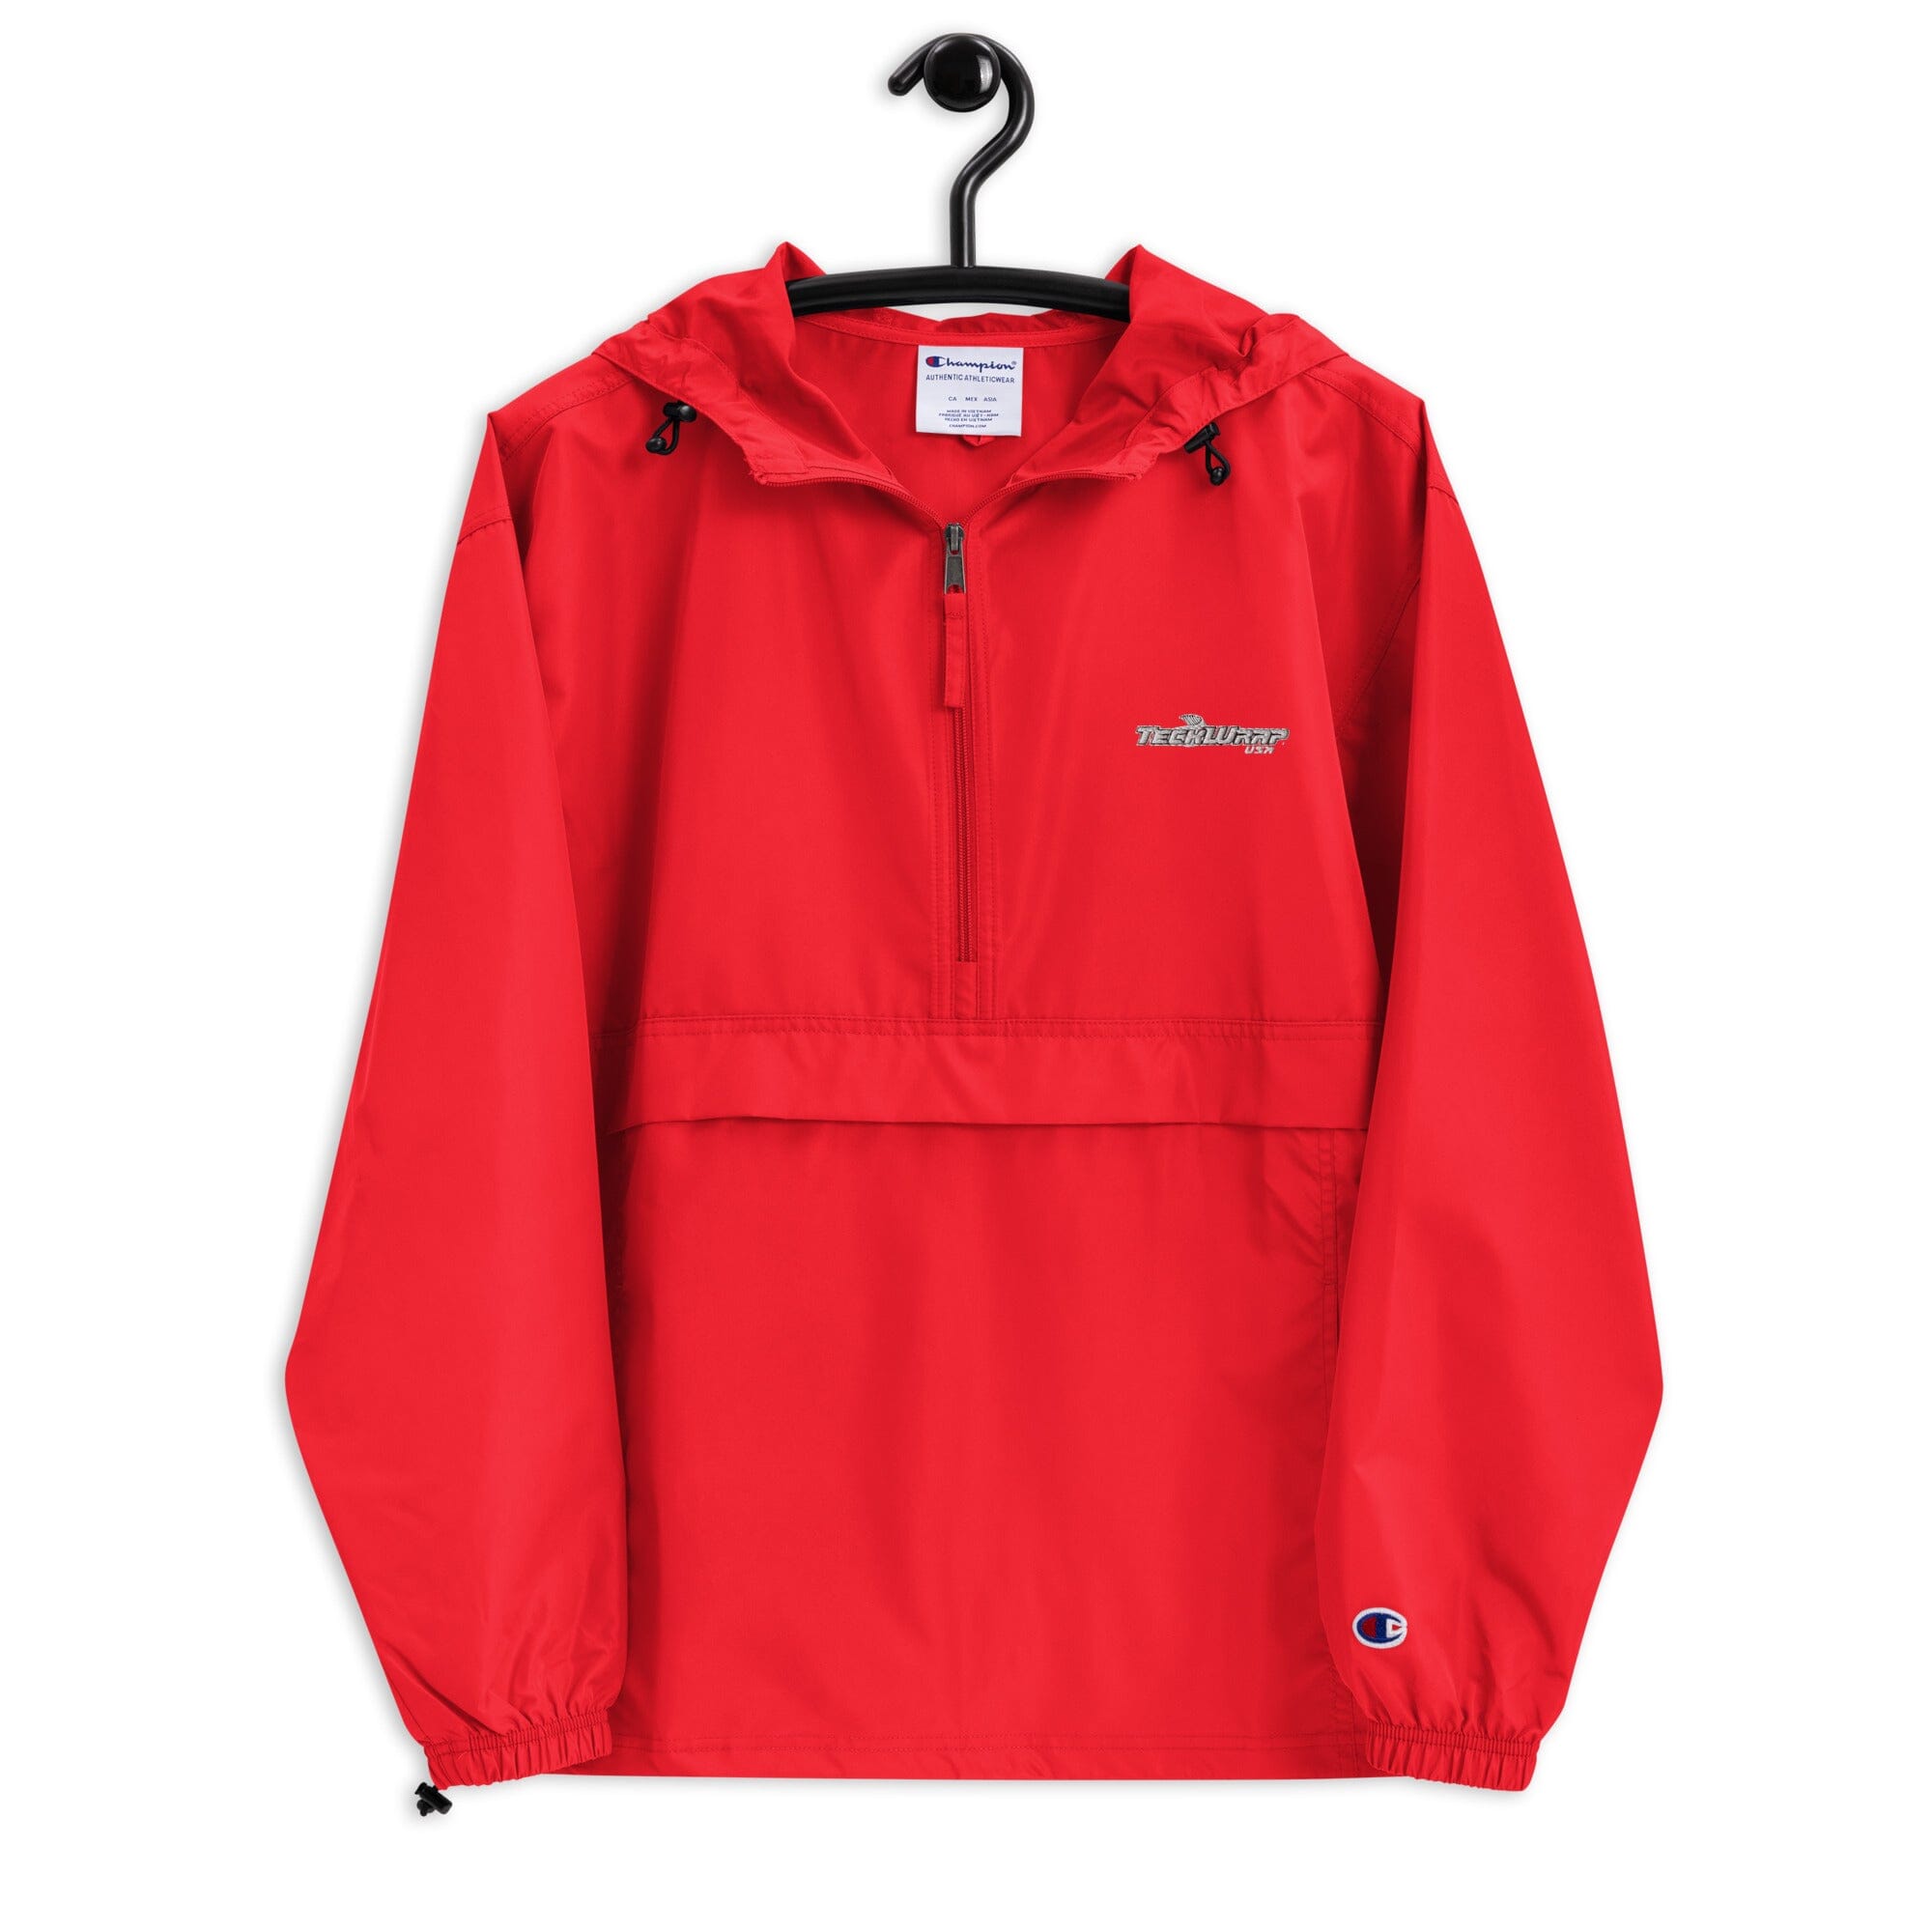 Embroidered Champion Packable Jacket Teckwrap USA Scarlet S 